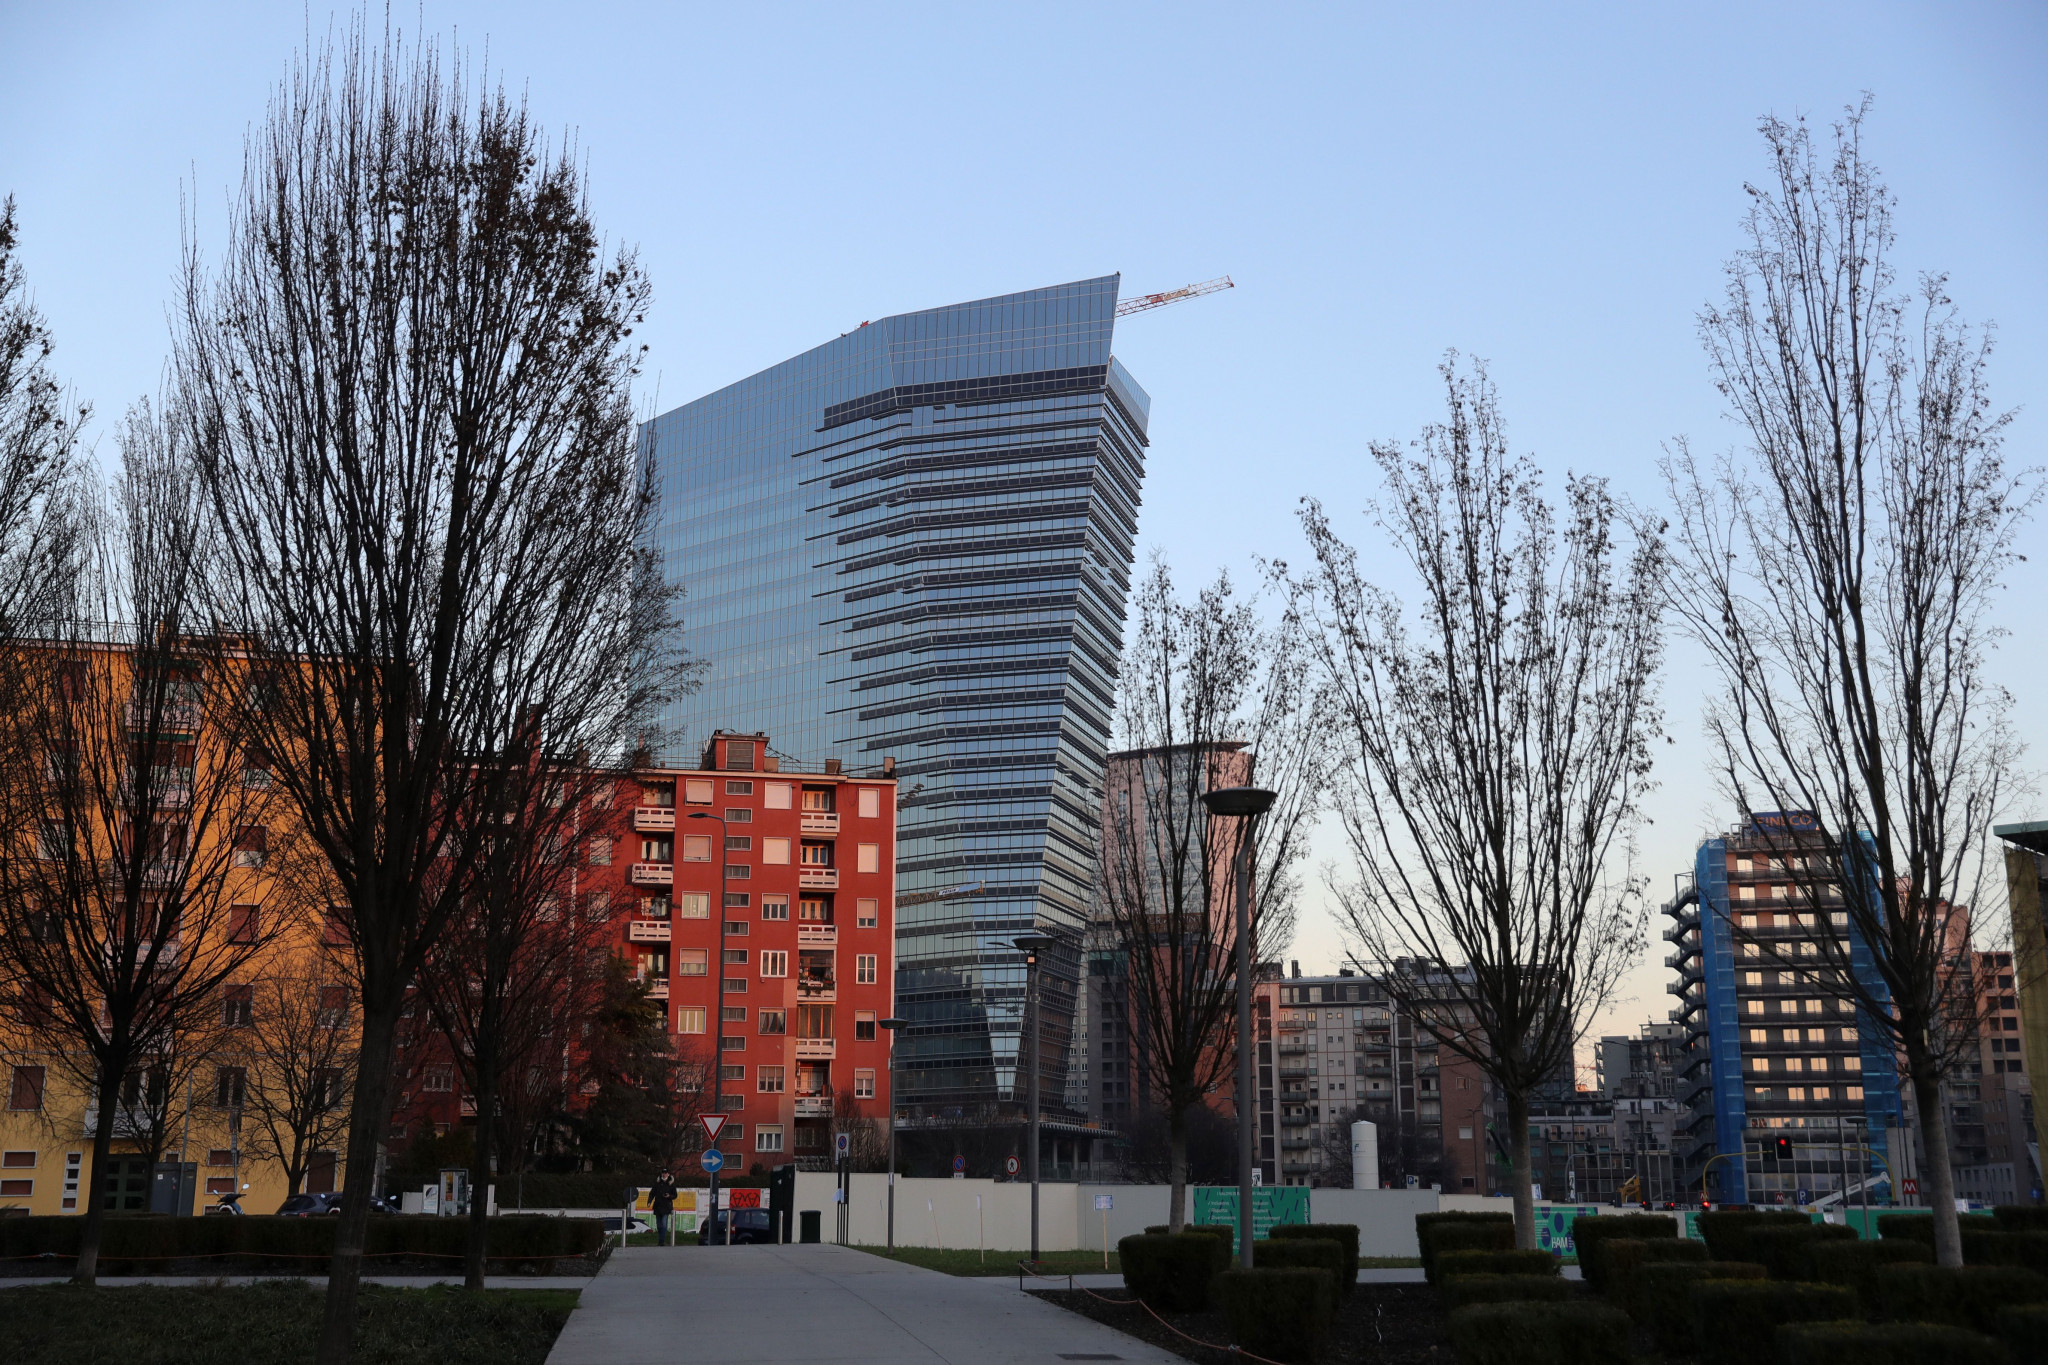 Milan's Olympic Village construction gets green light as appeal rejected